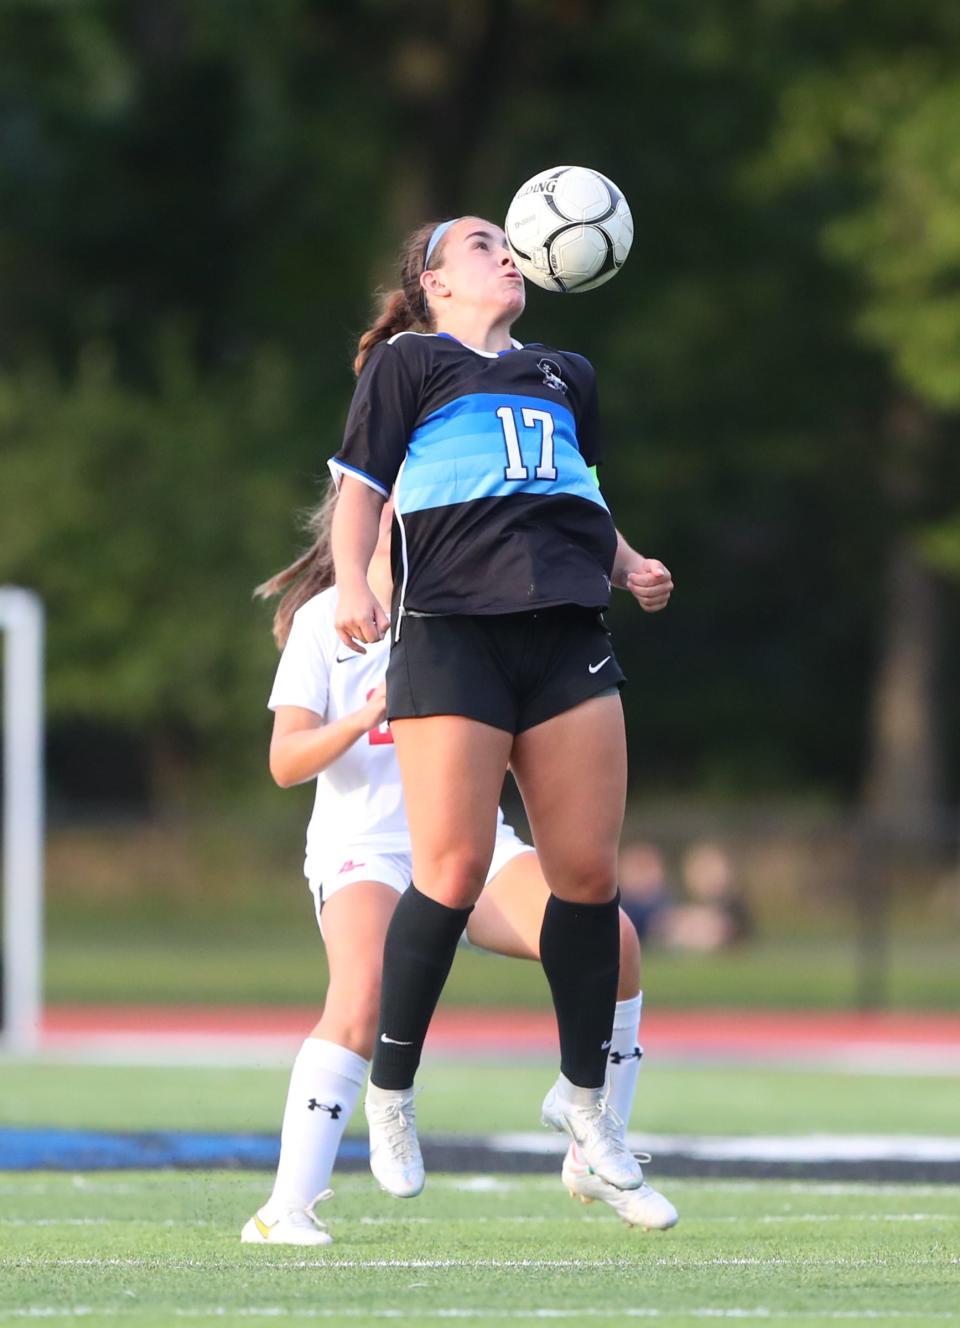 Pearl River's Marissa Graziano wins possession of the ball during the Pirates' 1-0 win over Tappan Zee on Thursday, September 29, 2022.